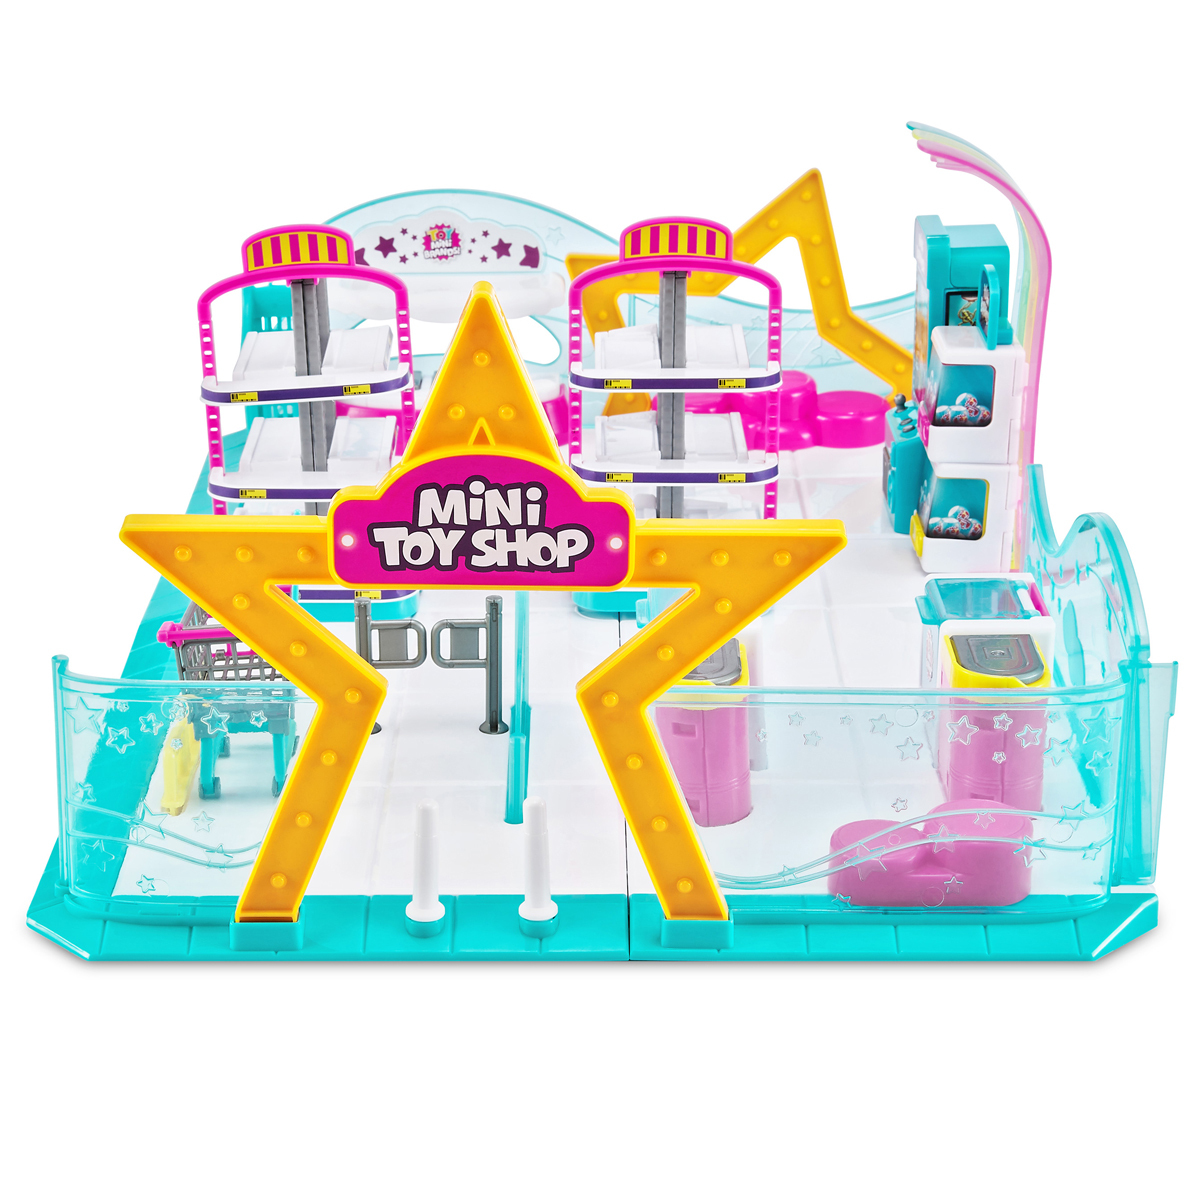 Disney Store Mini Brands Toy Store Playset with 2 Exclusive Minis by ZURU 